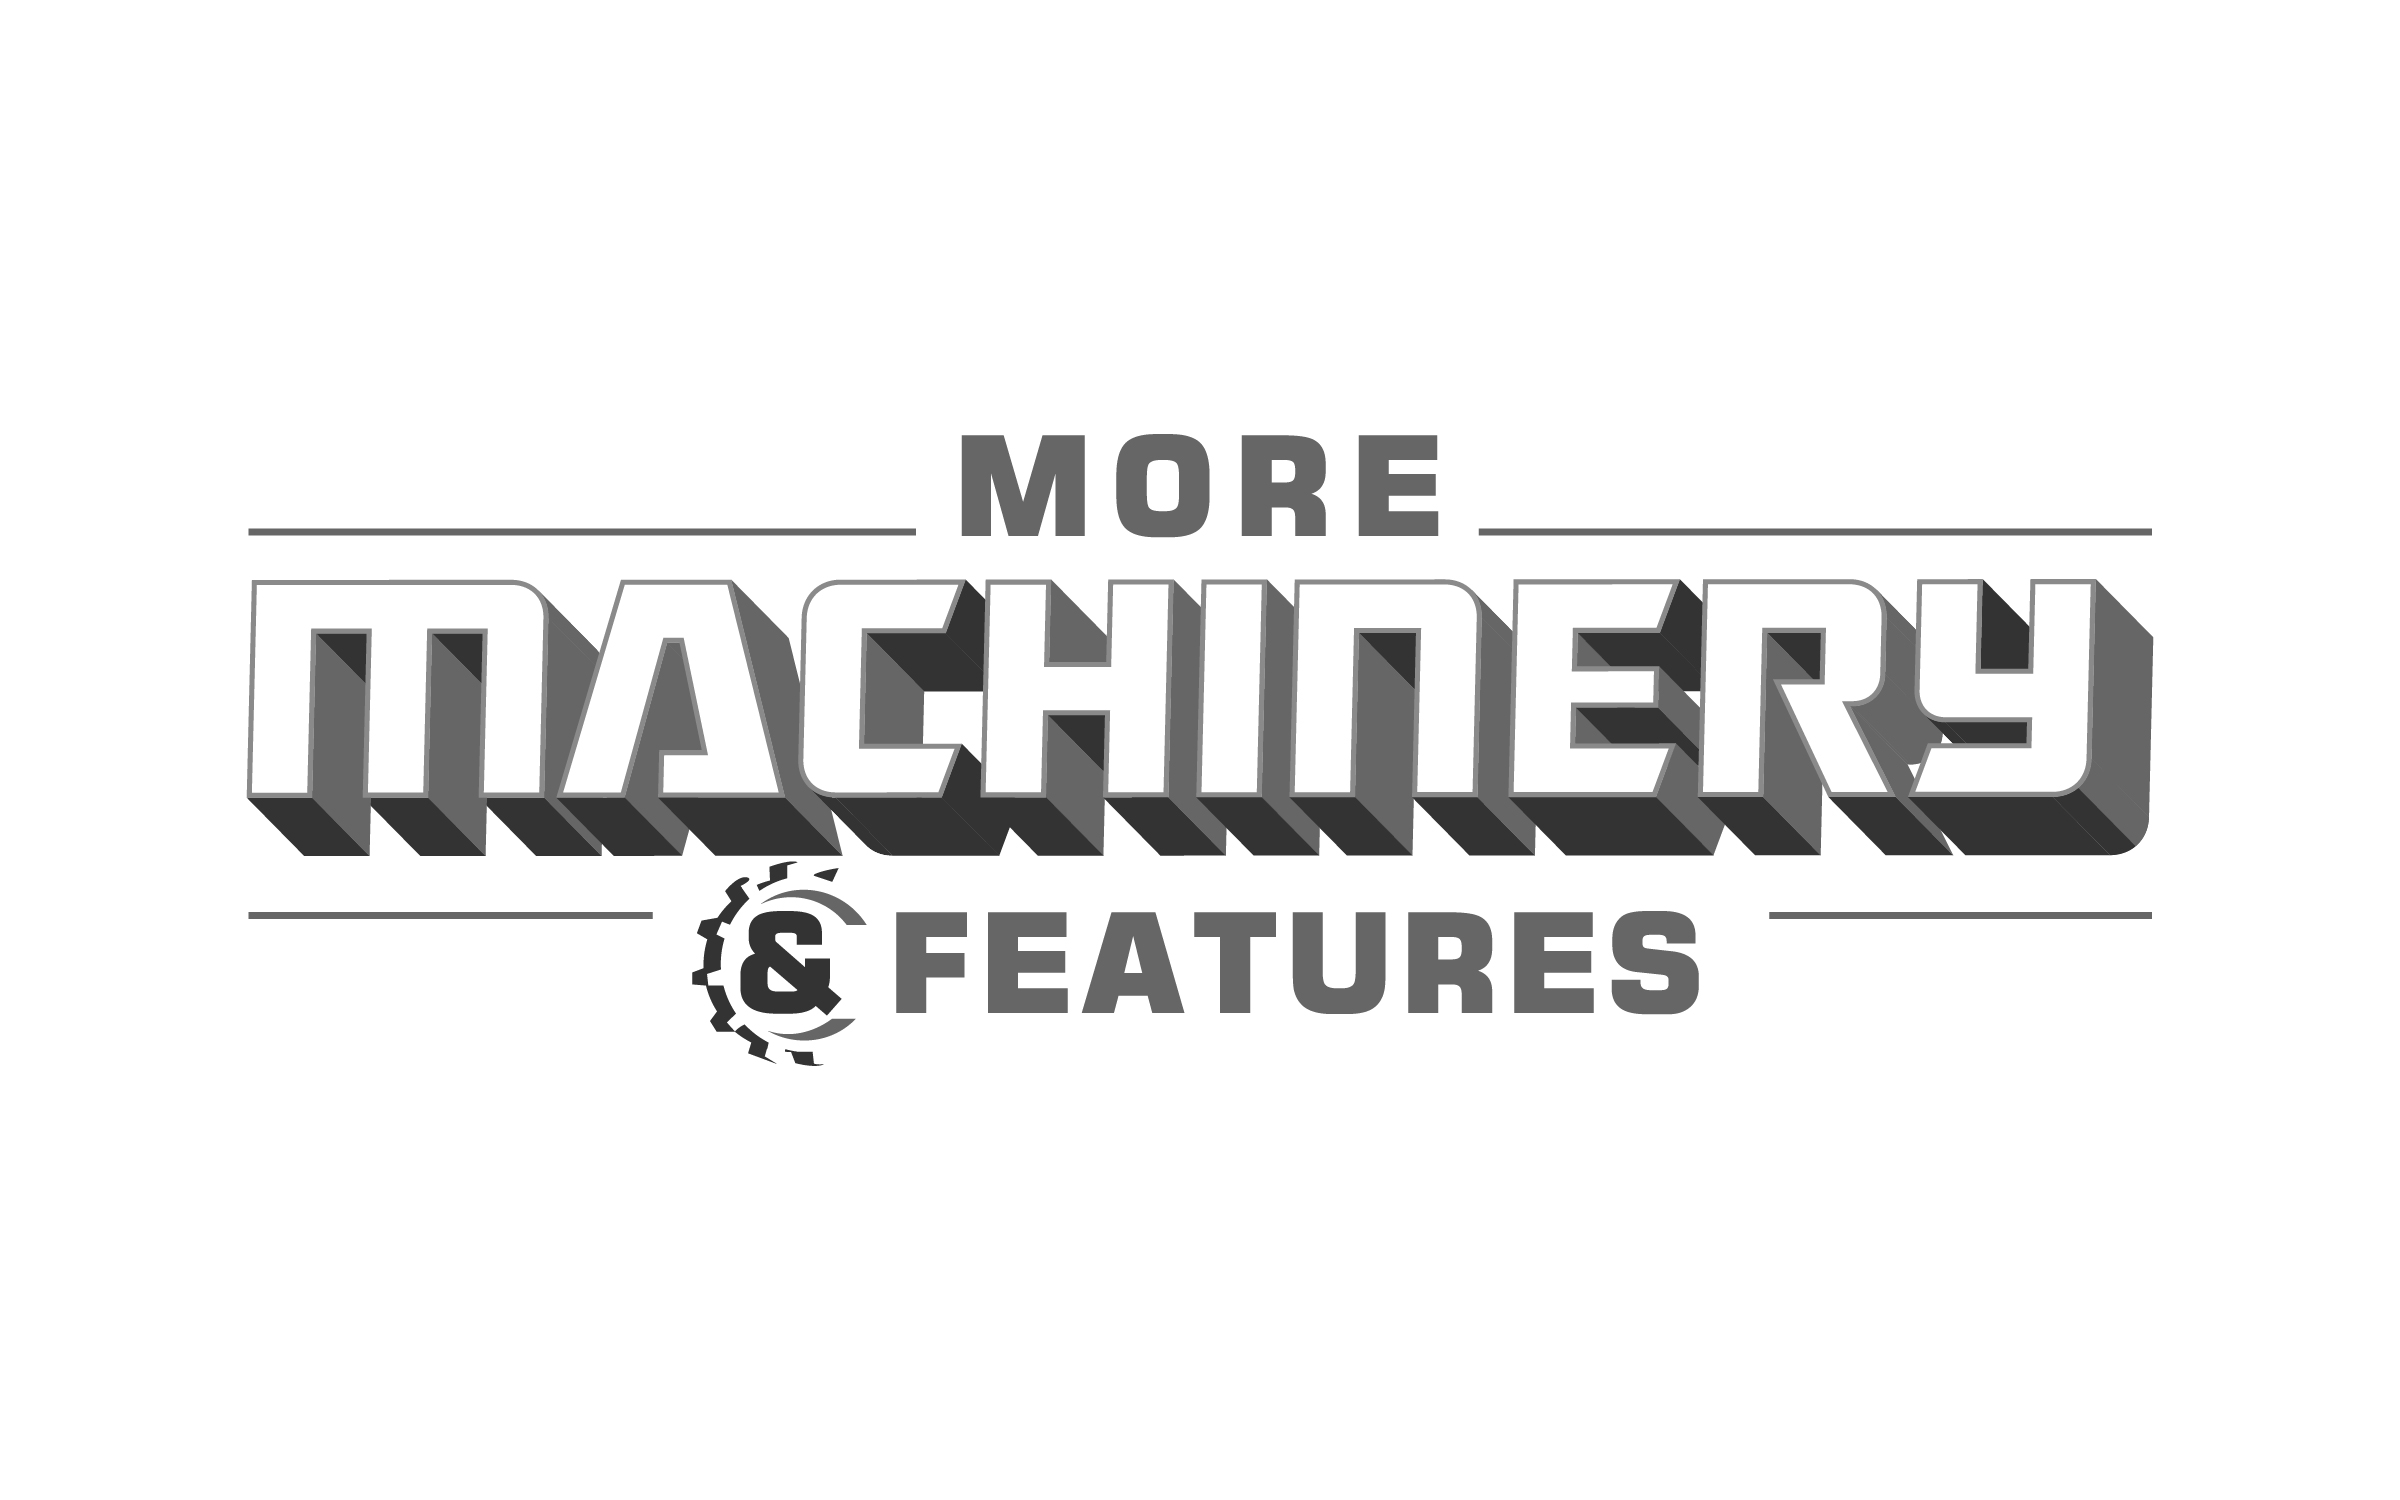 More Machinery & Features-01.jpg